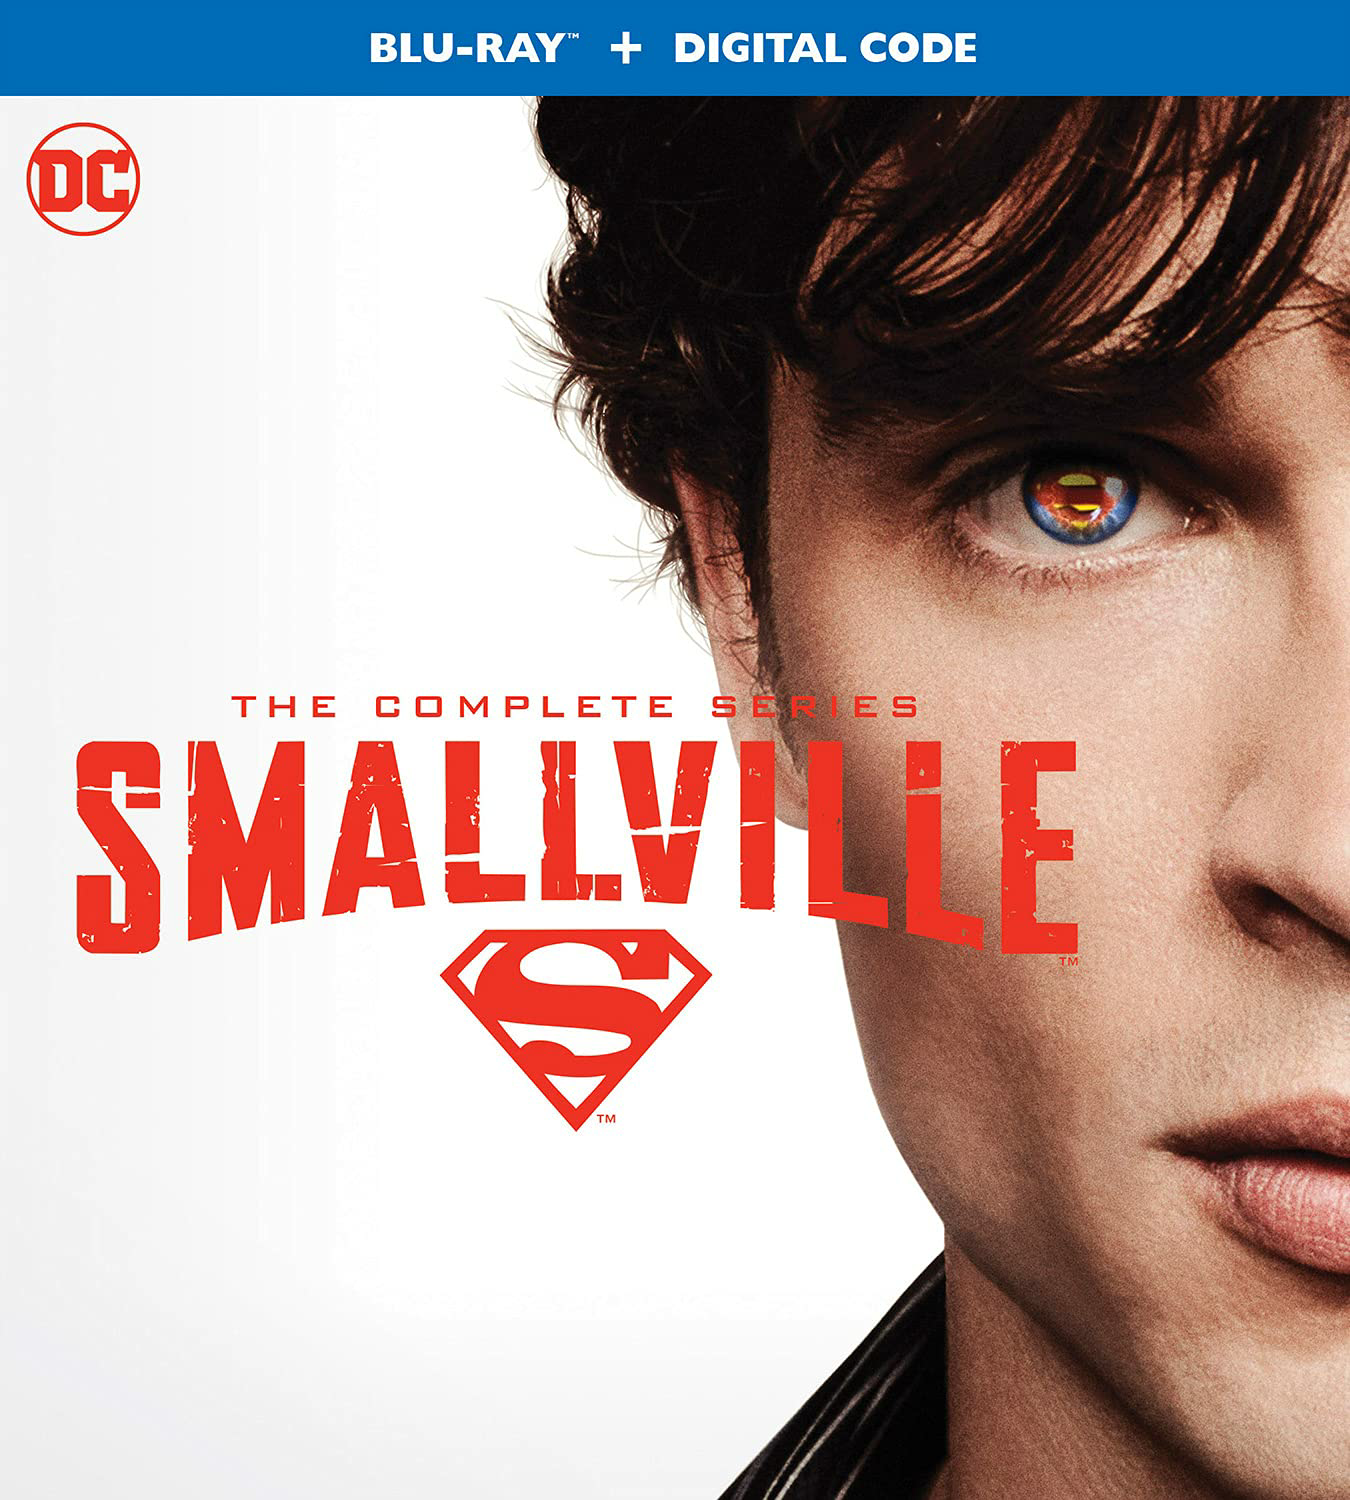 Smallville: The Complete Series 20th Anniversary Collection (Blu-ray + Digital Code) $133.69